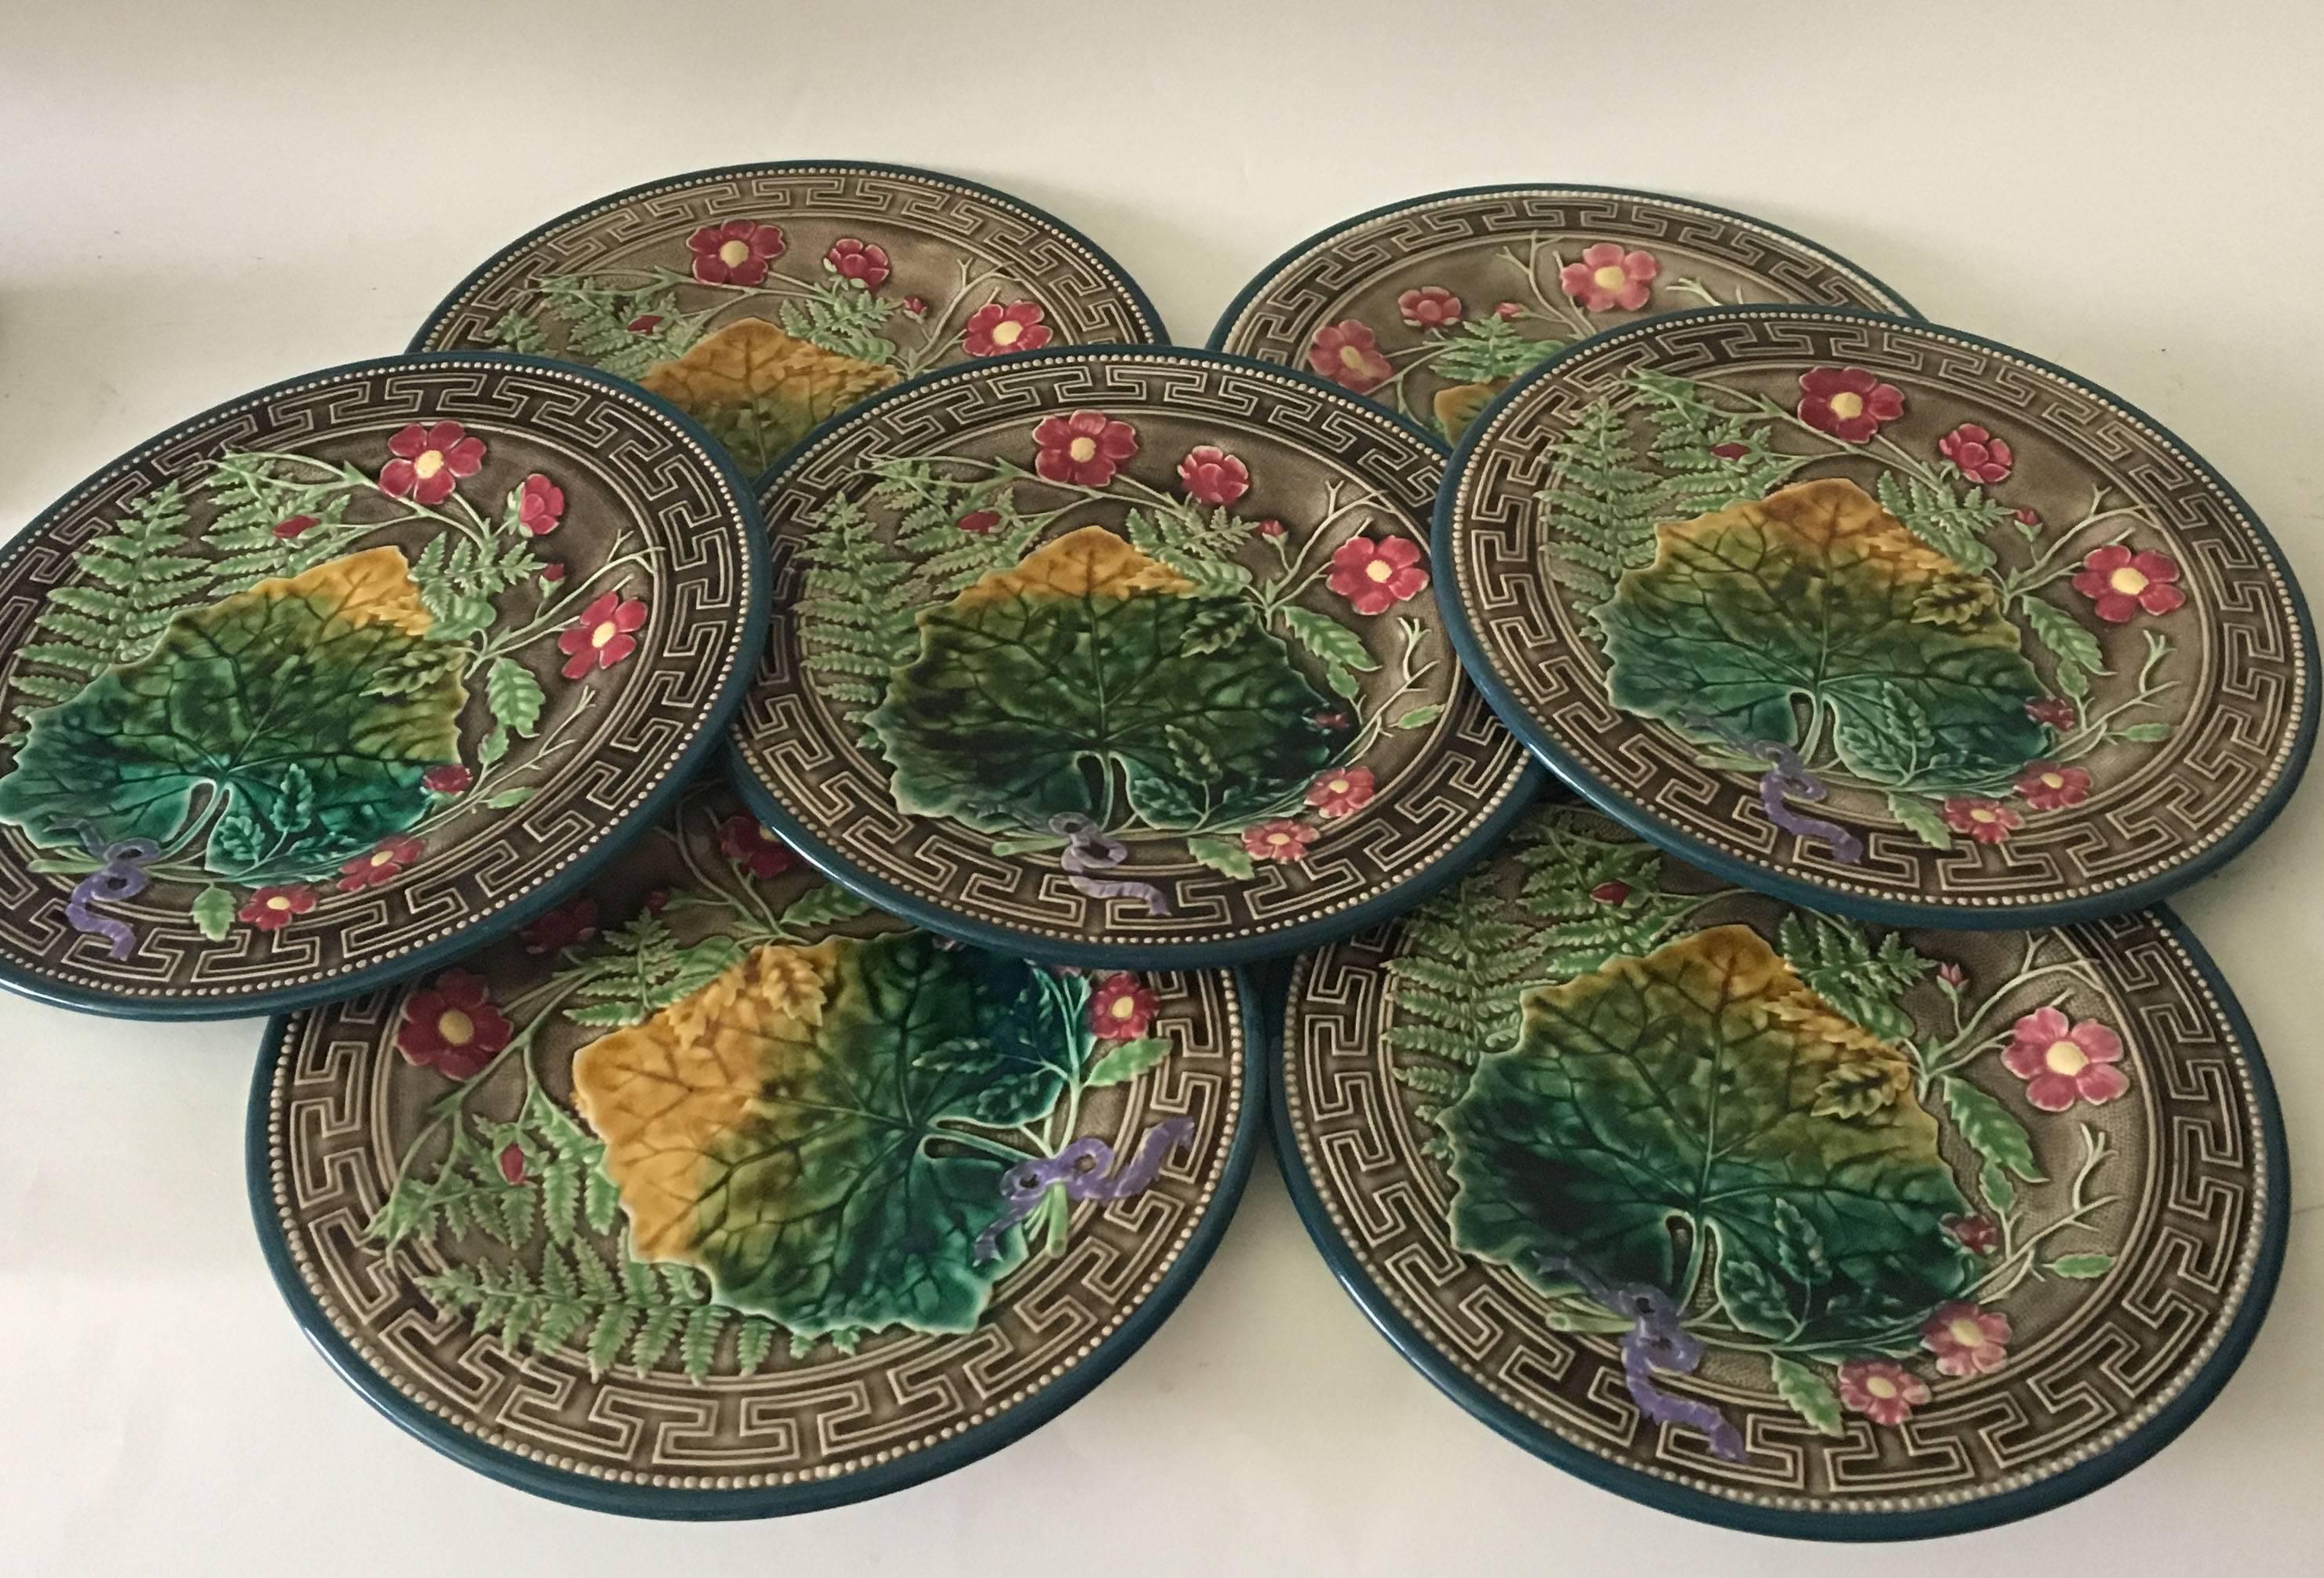 Stunning colors for this Majolica plates signed Choisy le roi, circa 1890.
Decorated with leaves, ferns, pink flowers and Greek border.